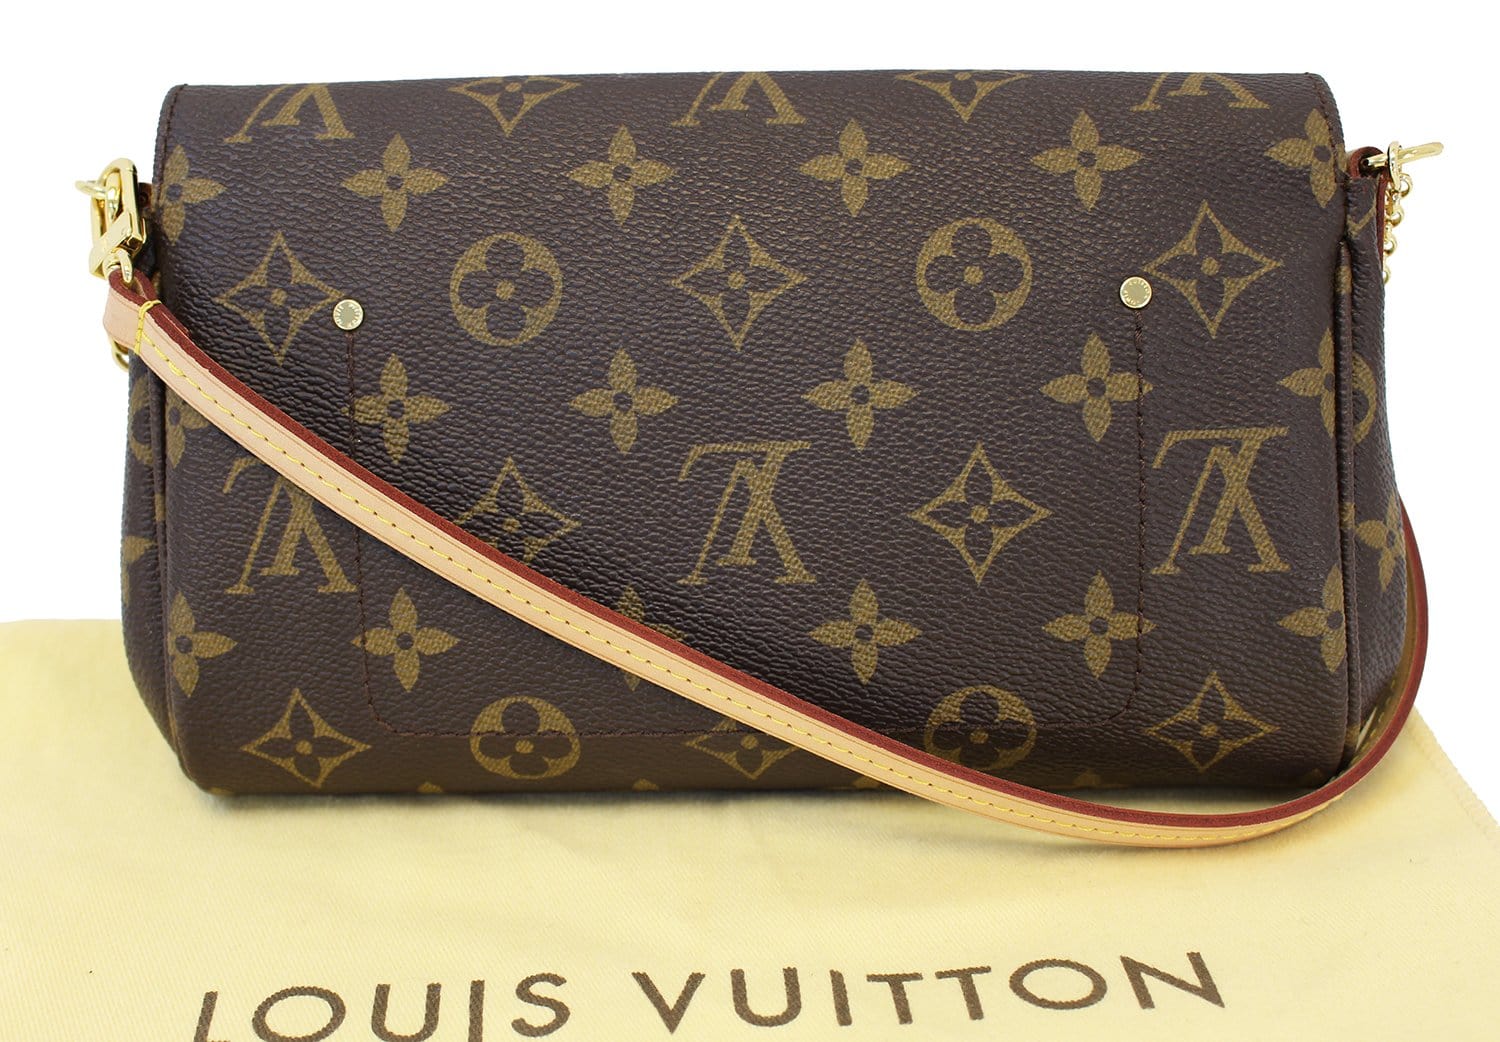 HER Authentic - Literally used no more than 5x. Super light patina &  perfect crossbody. Louis Vuitton Monogram Montaigne BB is on our website  for $1,800. Current retail is $2,490+tax. Insane price